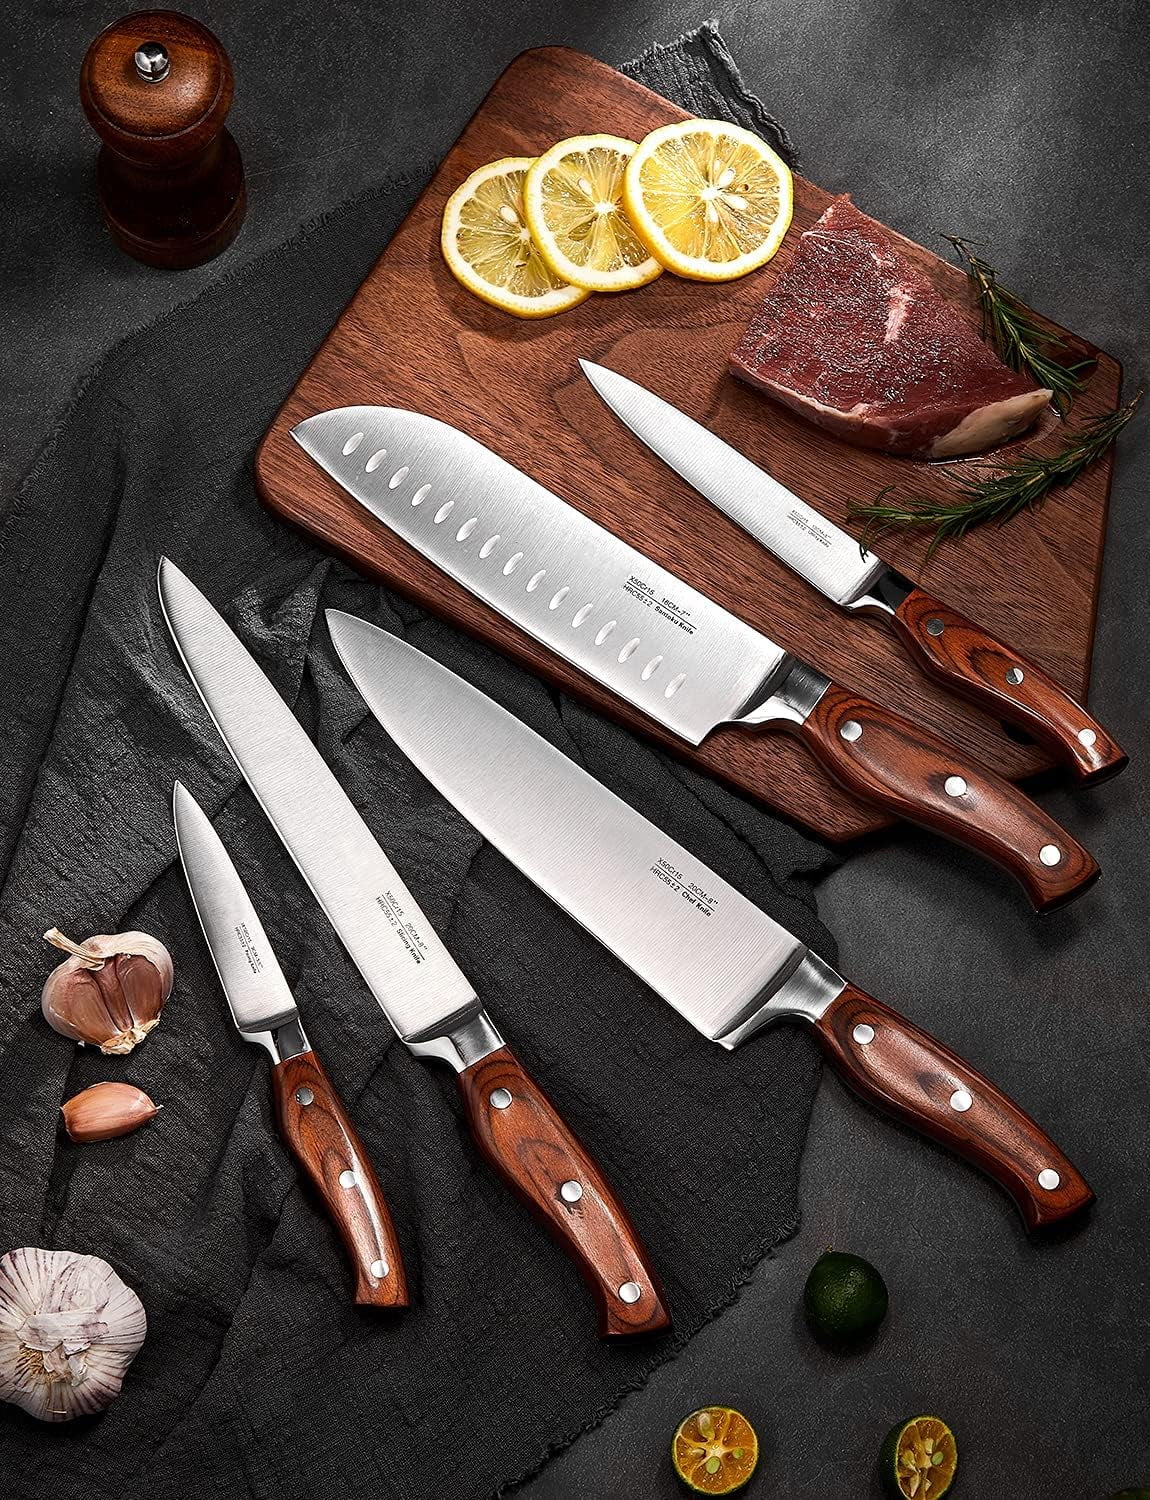 Craft Kitchen Knives Set of 3, Non Stick 10.8 Professional Chef Knife,  Graffiti Aesthetic 10.5 Carving Steak Knife, 8.2-IN Paring Knife, Floral